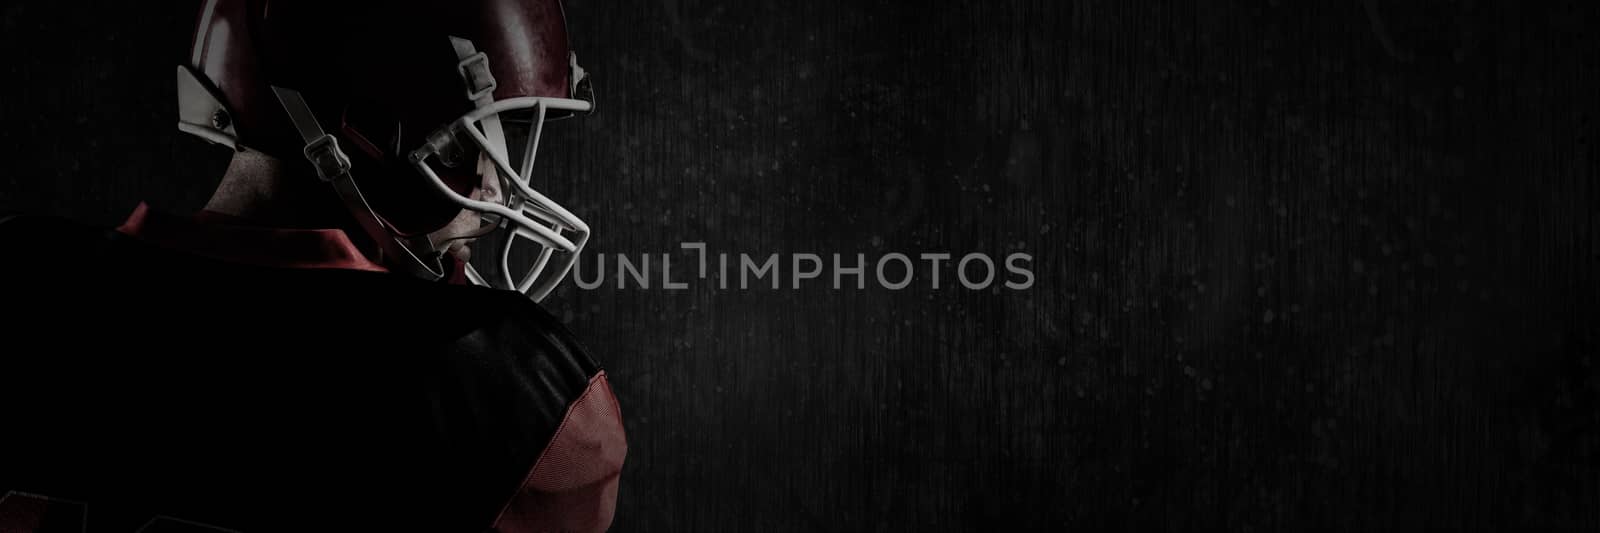 Composite image of american football player in helmet looking off to the side by Wavebreakmedia